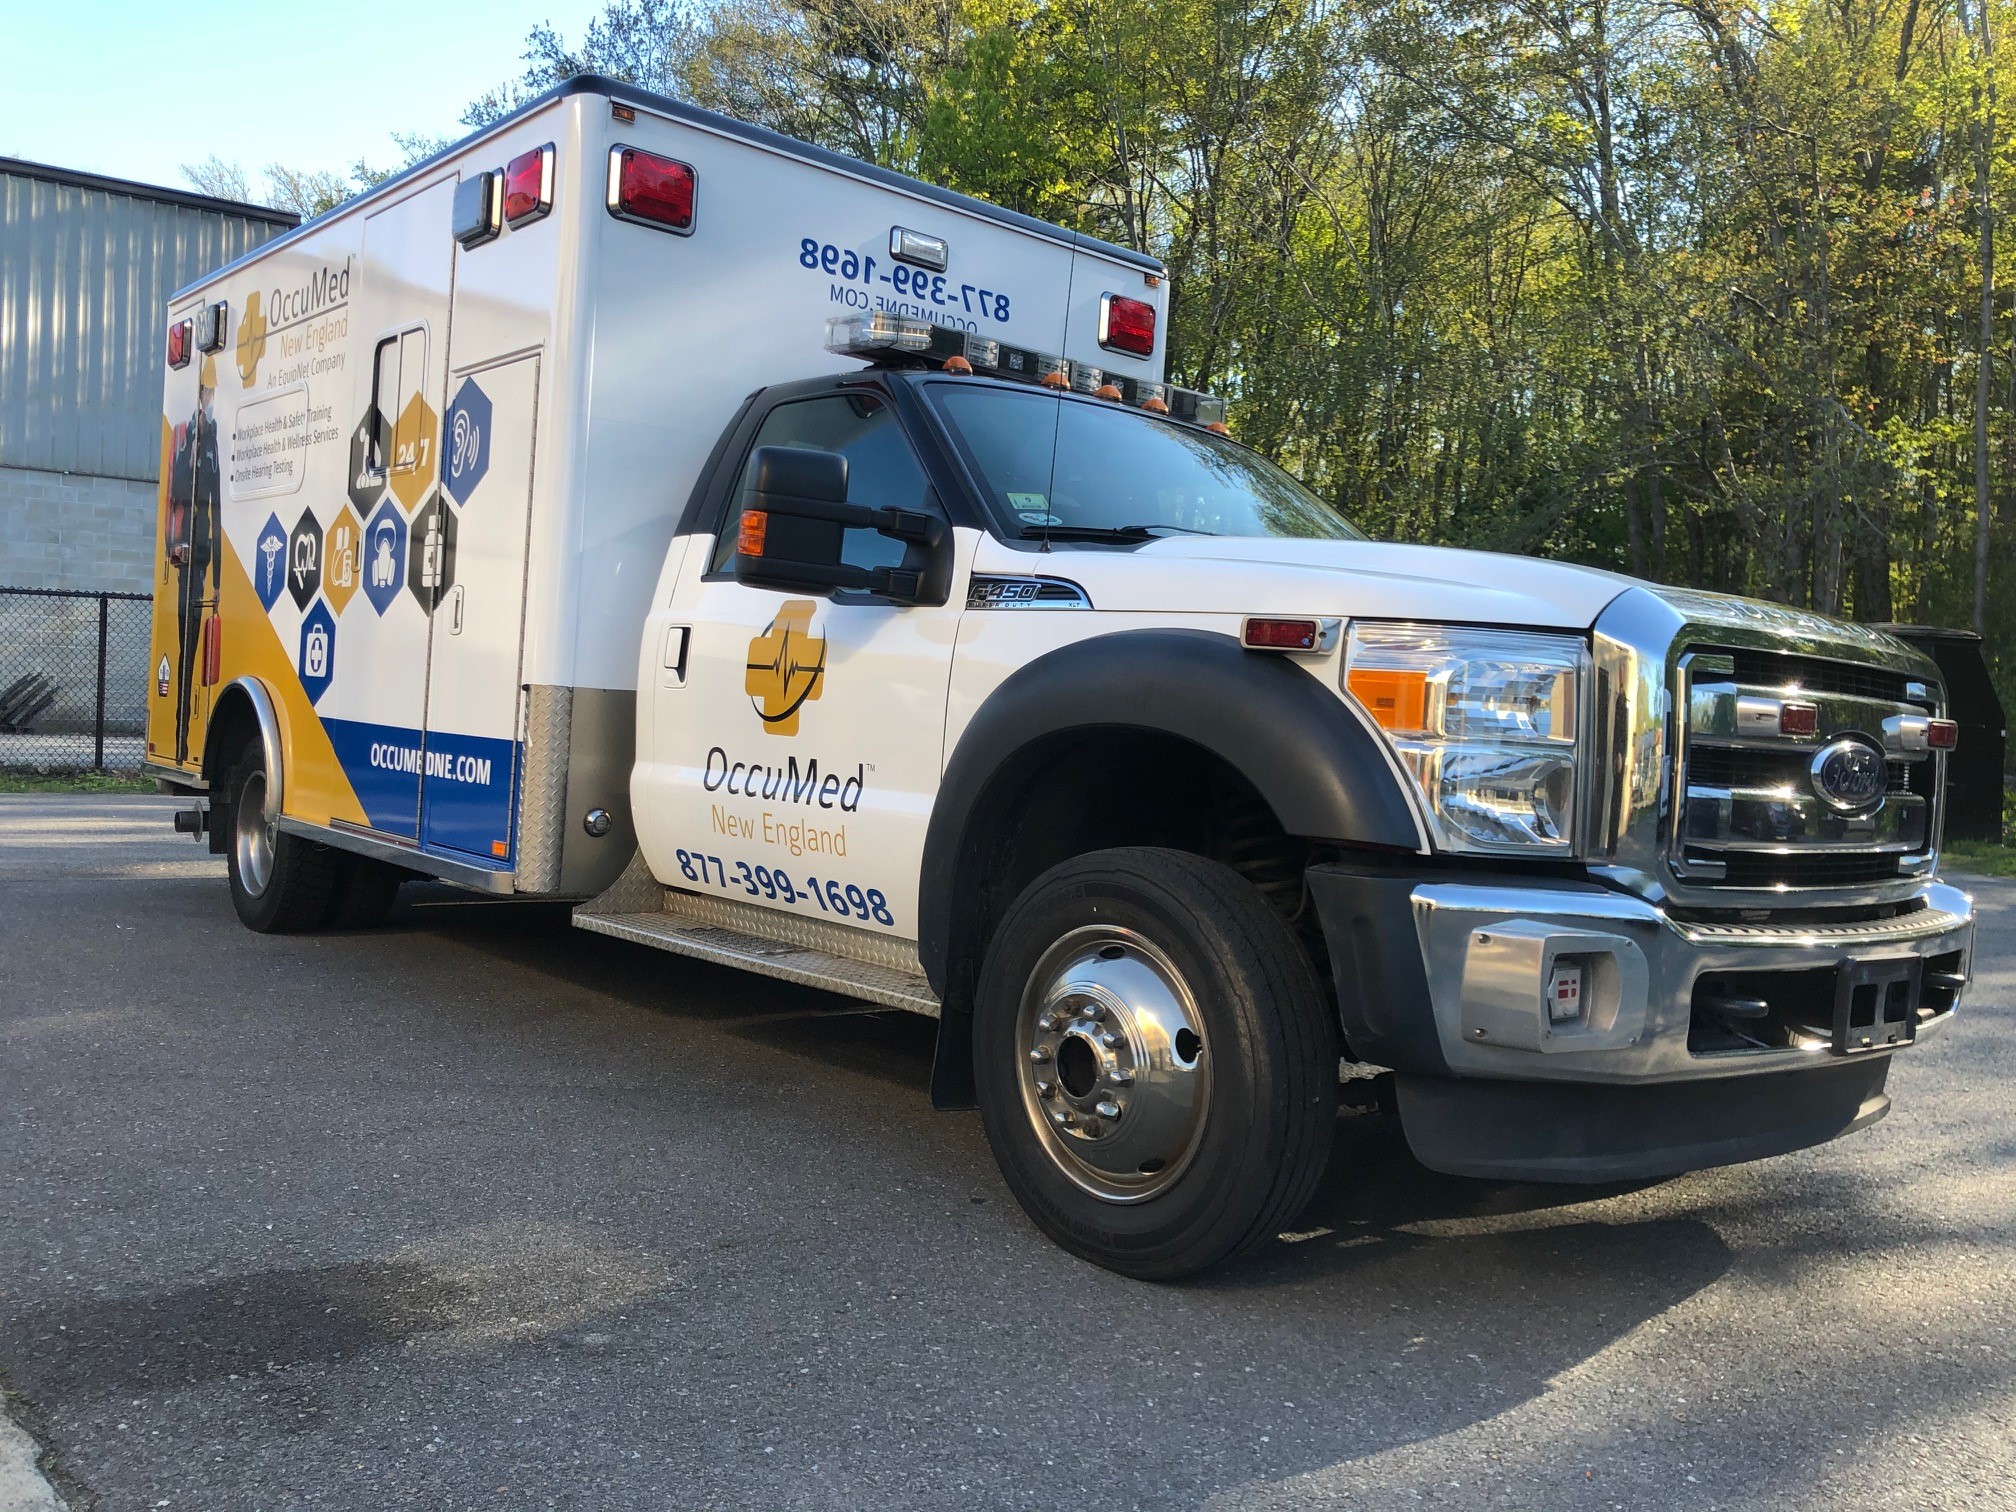 ambulance decals and graphics